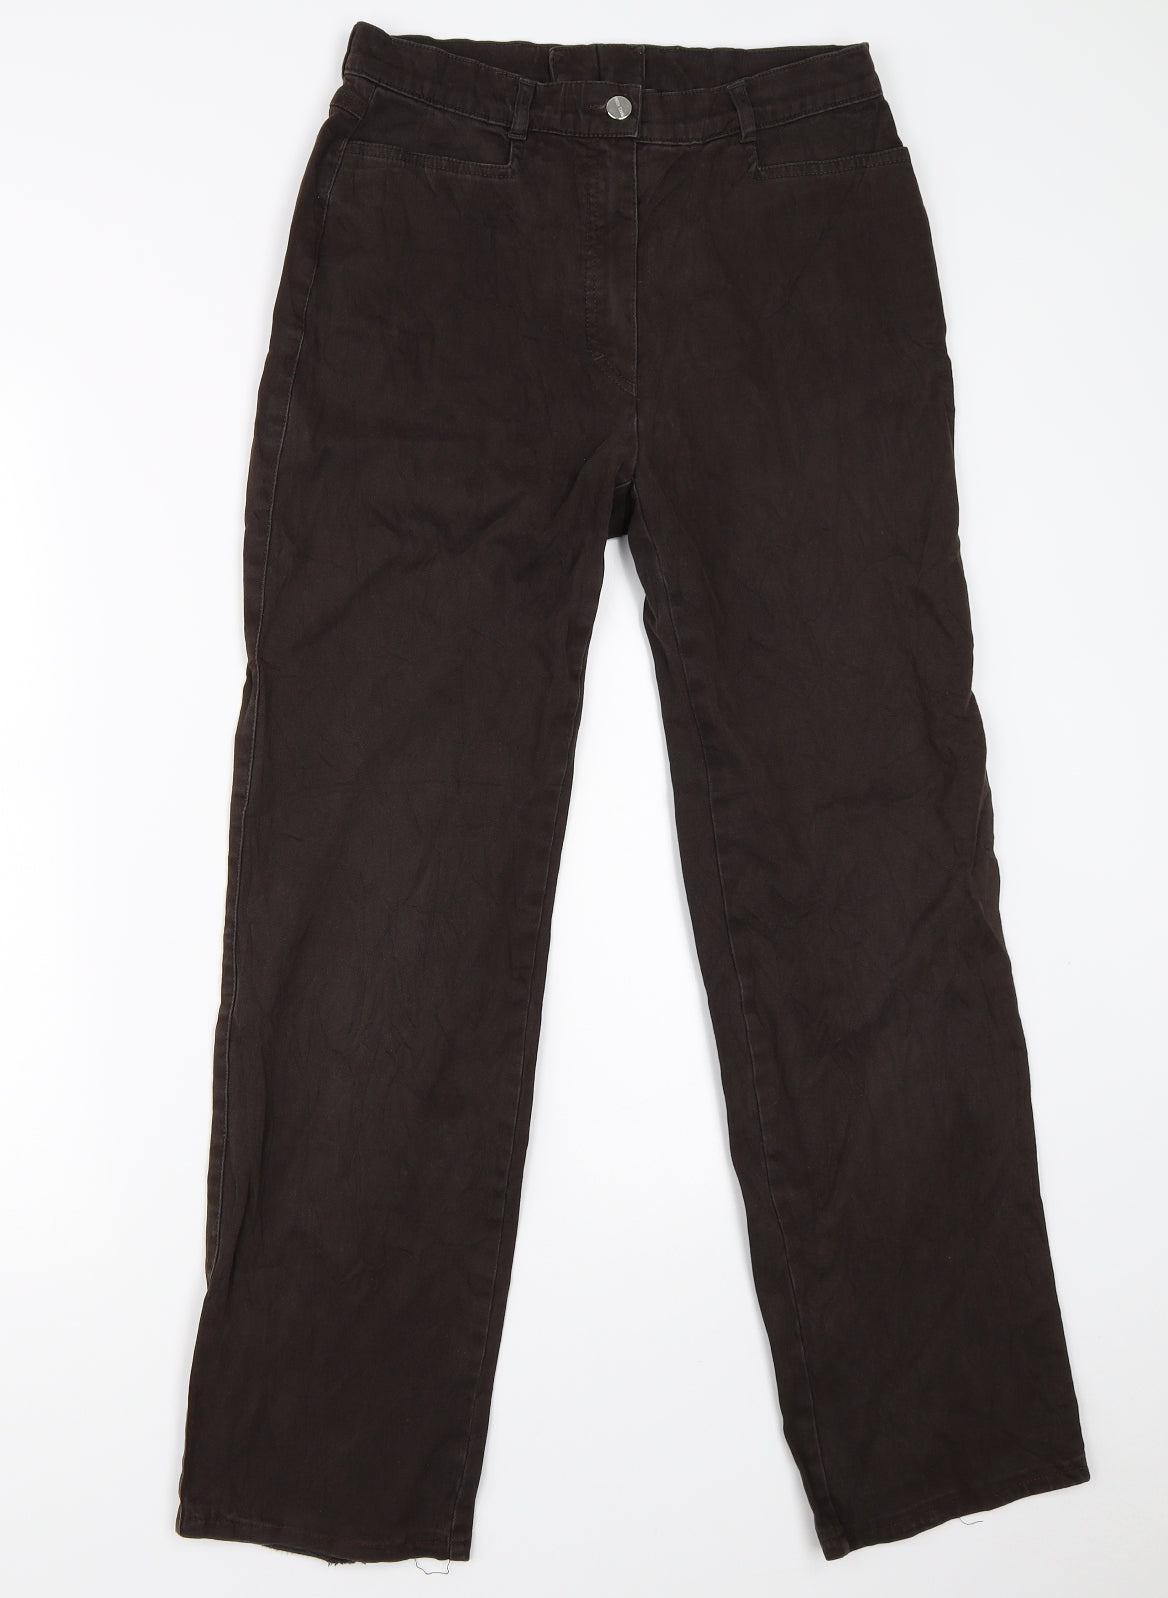 ZERRES Womens Brown   Chino Trousers Size 12 L27 in